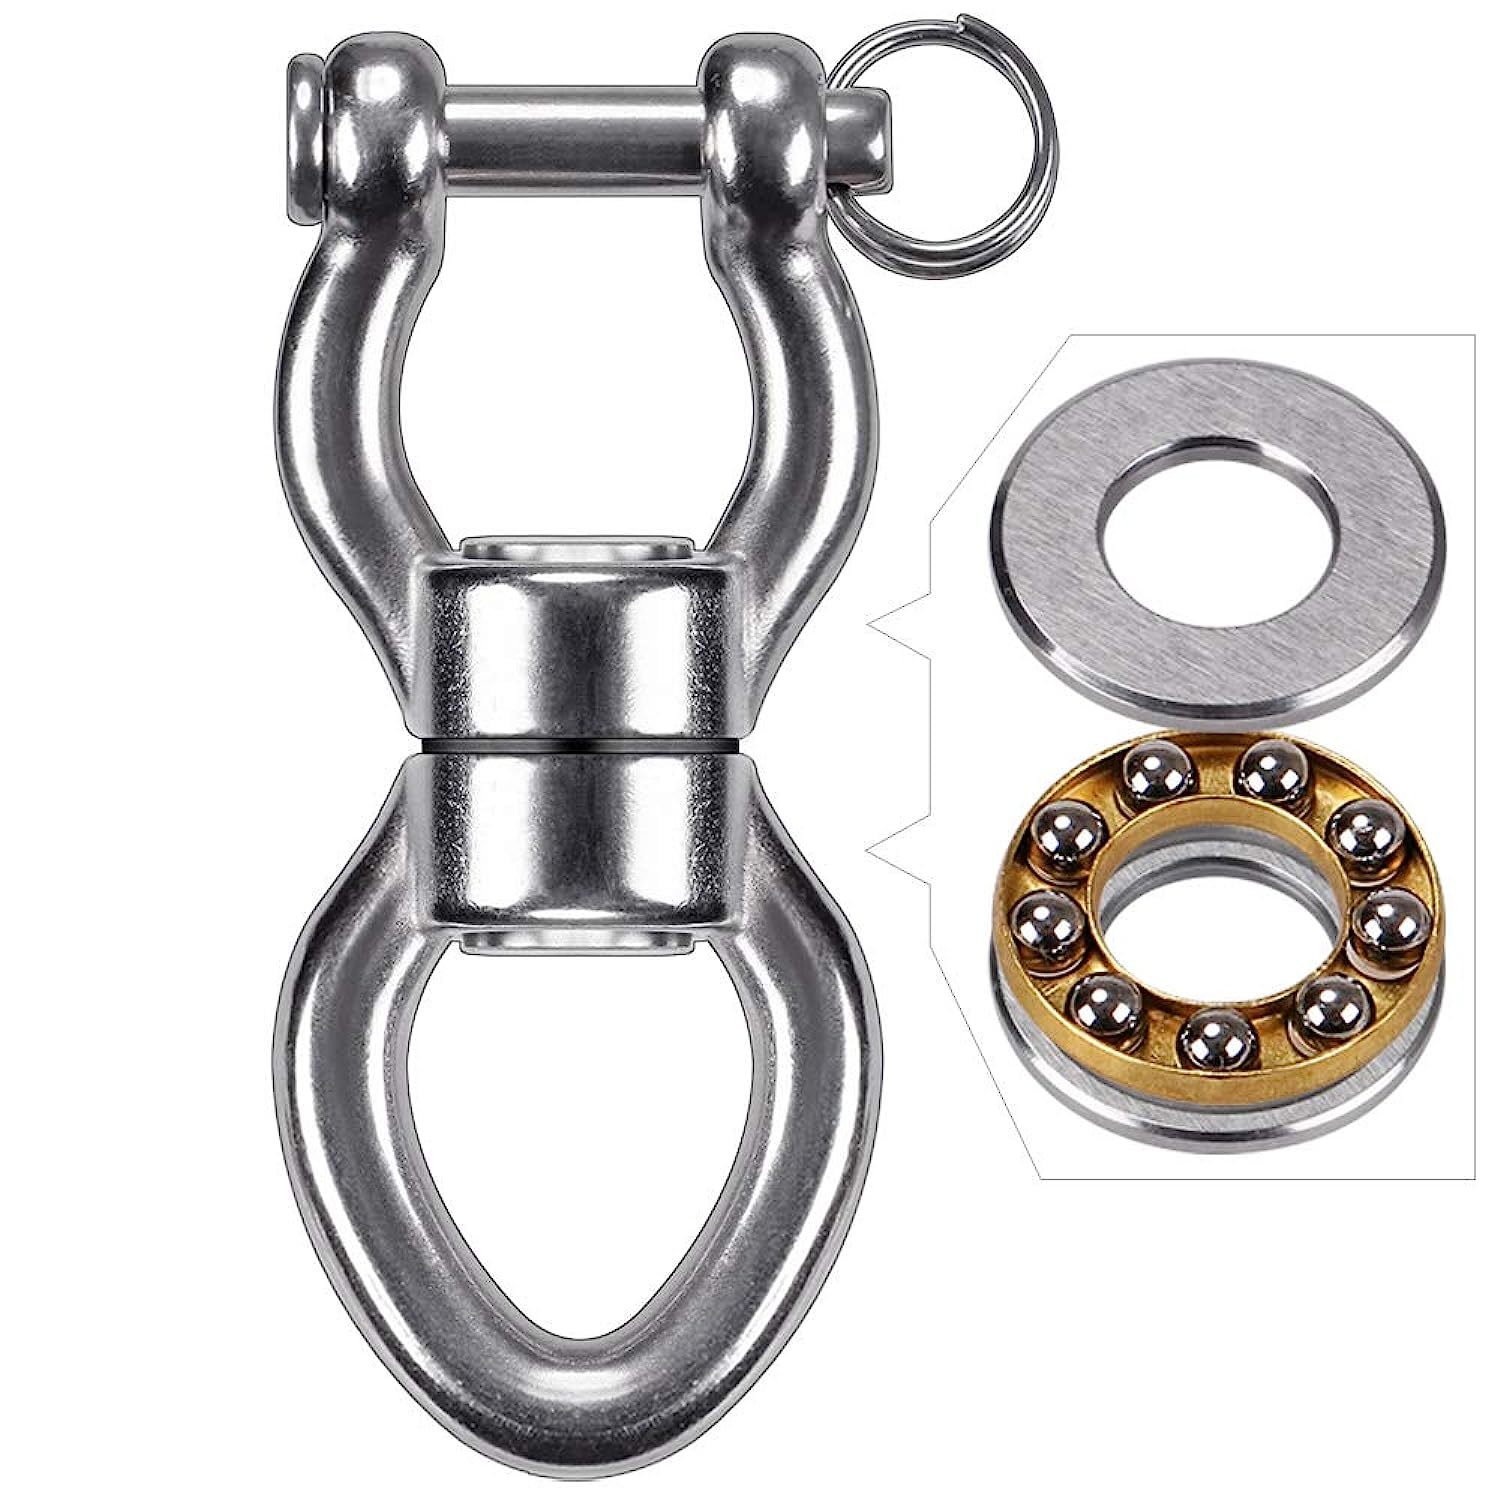 Silent Bearing Swing Swivel, 360 Rotational Device Hanging Accessory With Remove - $30.39